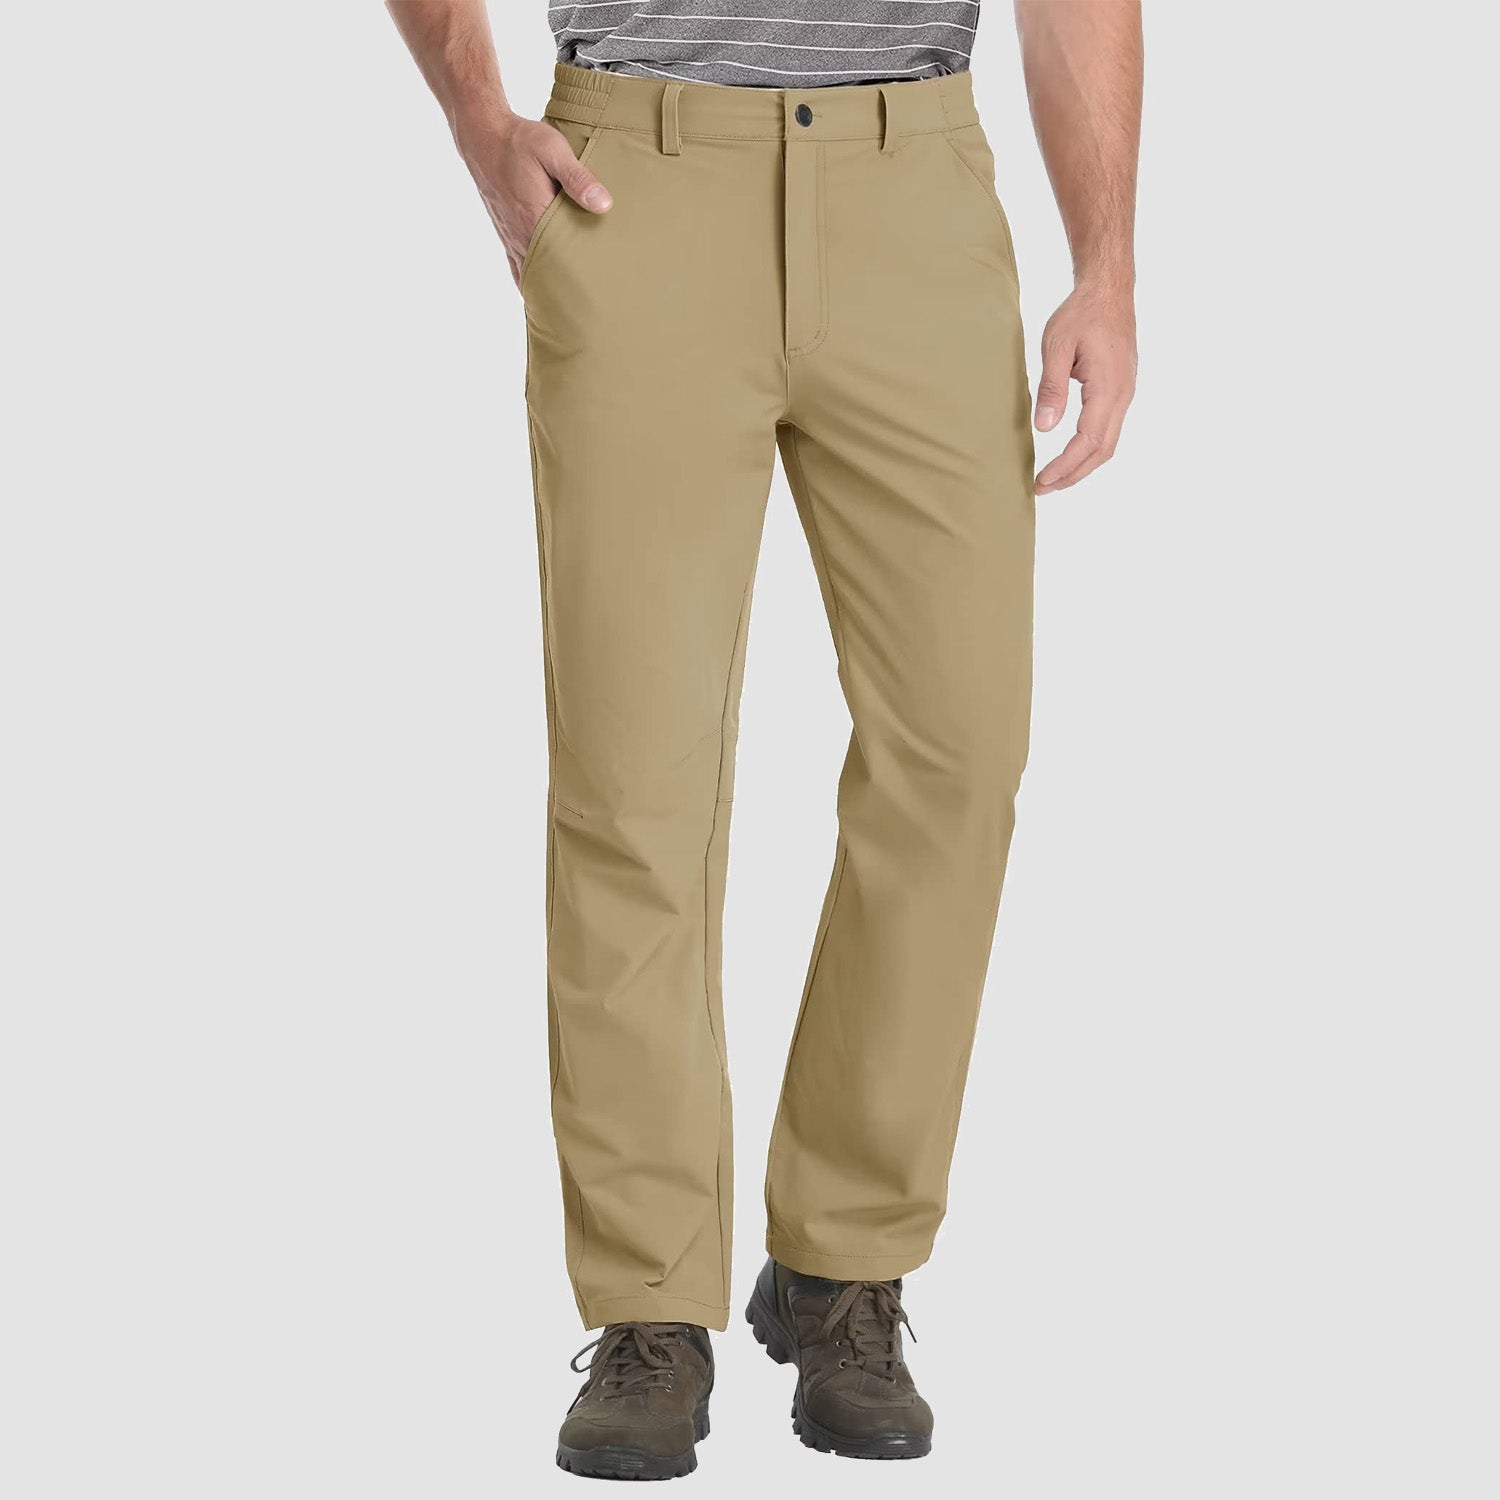 Men's Golf Pants Quick Dry Stretch Trousers